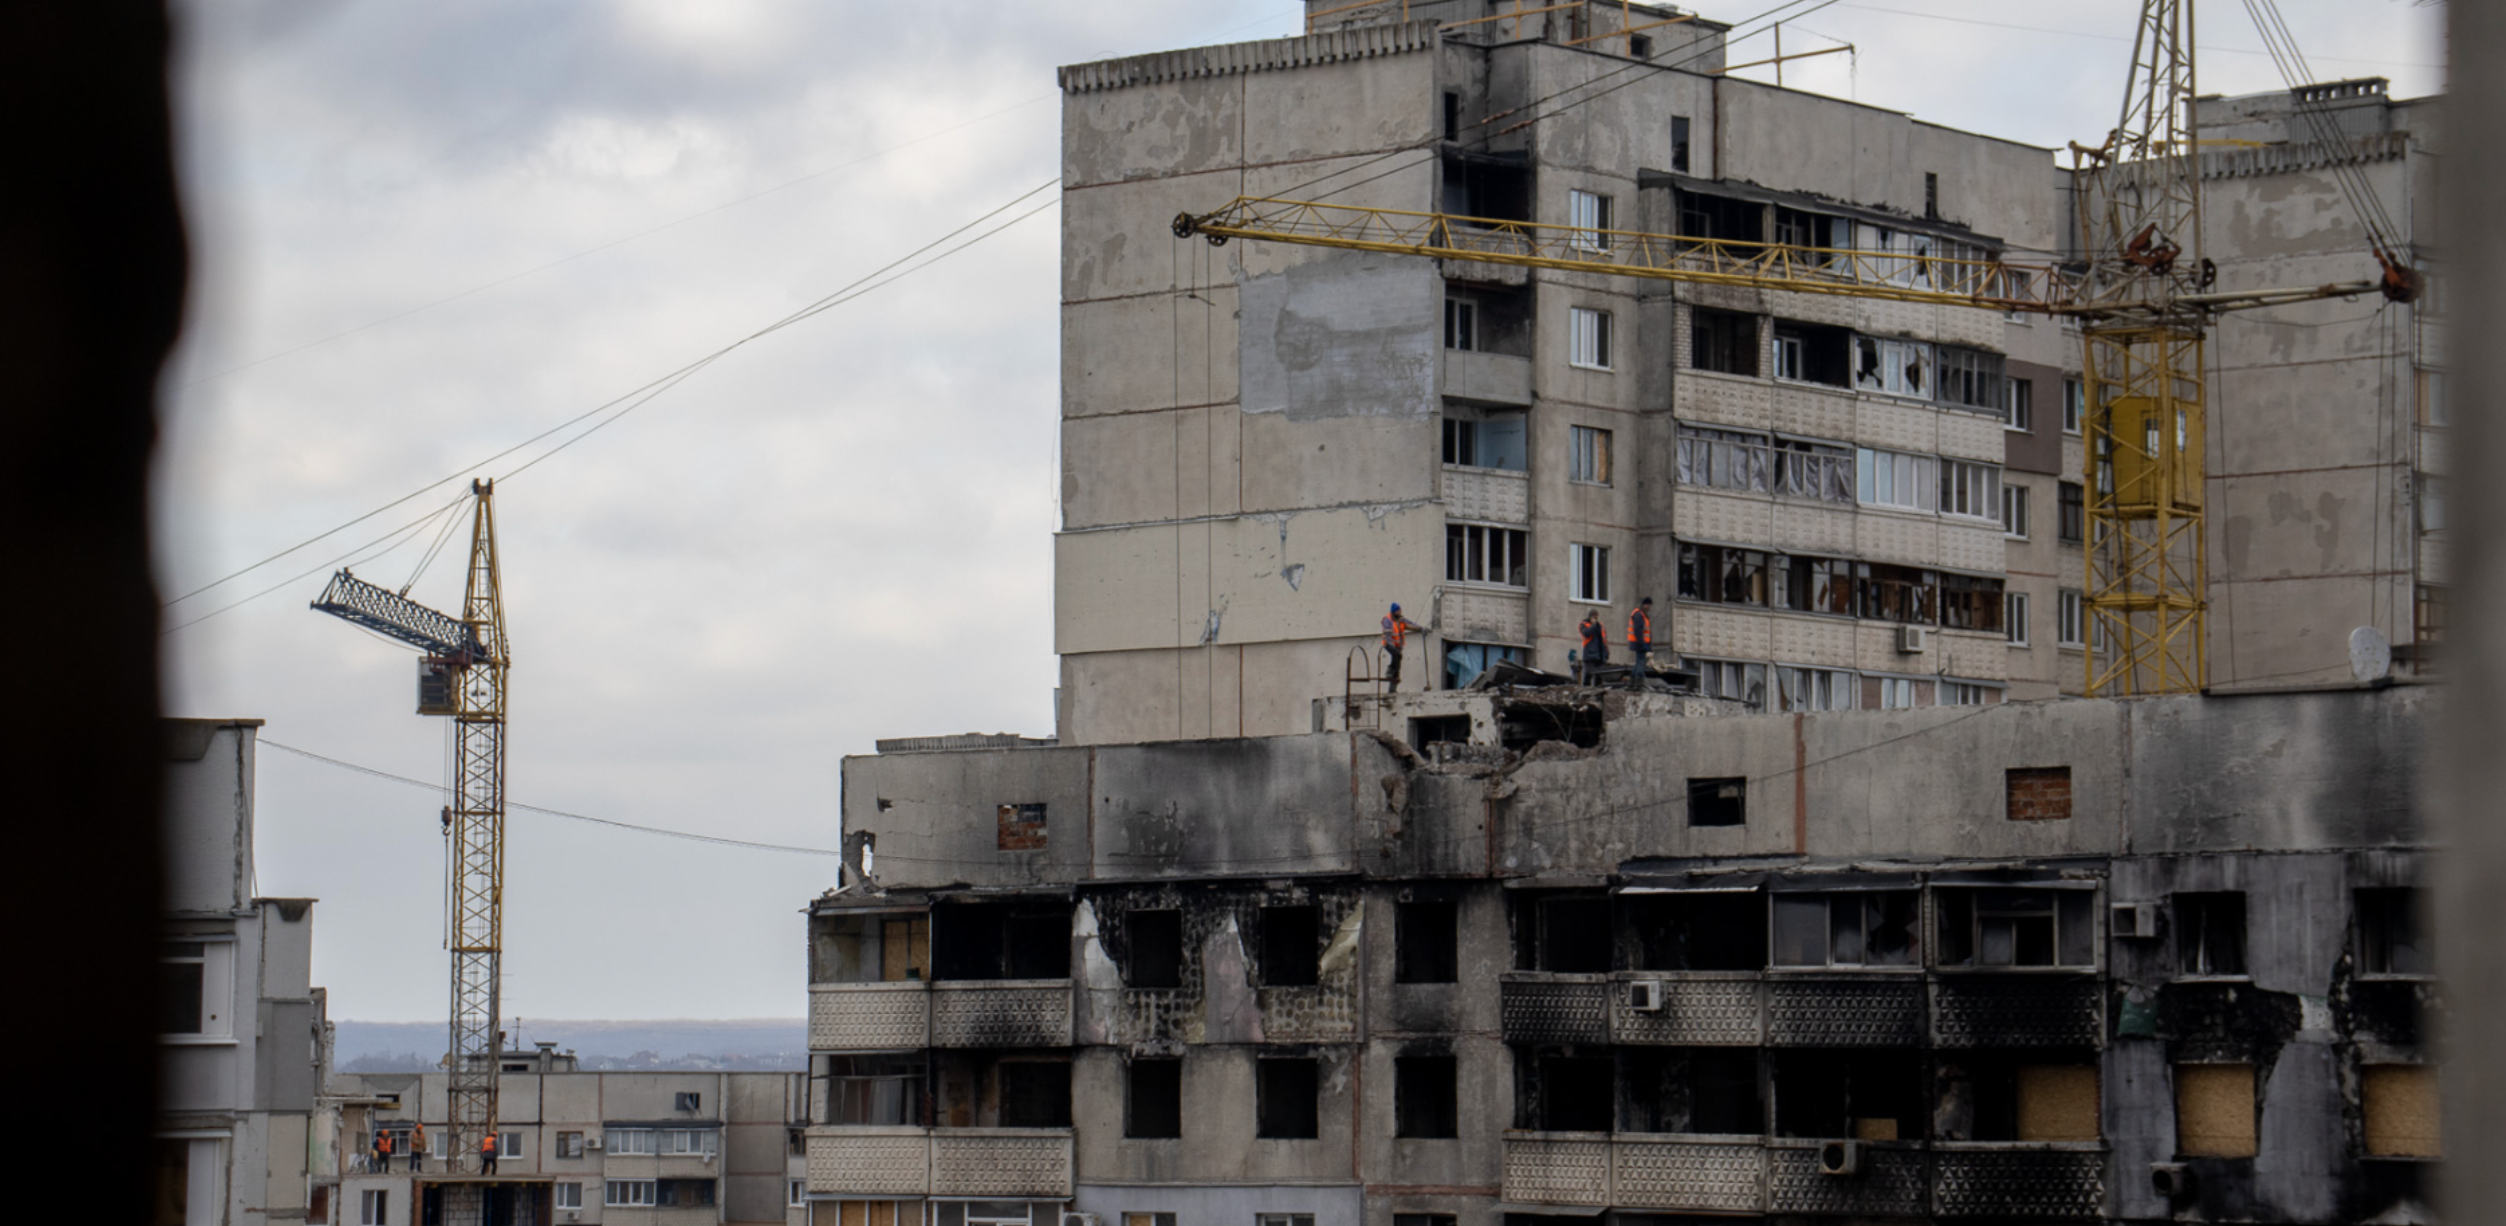 Reconstruction and restoration of the Northern Saltivka neighborhood's apartment buildings that were destroyed or damaged by Russian aggression are ongoing / Photo: Oleksandr Magula for Gwara Media